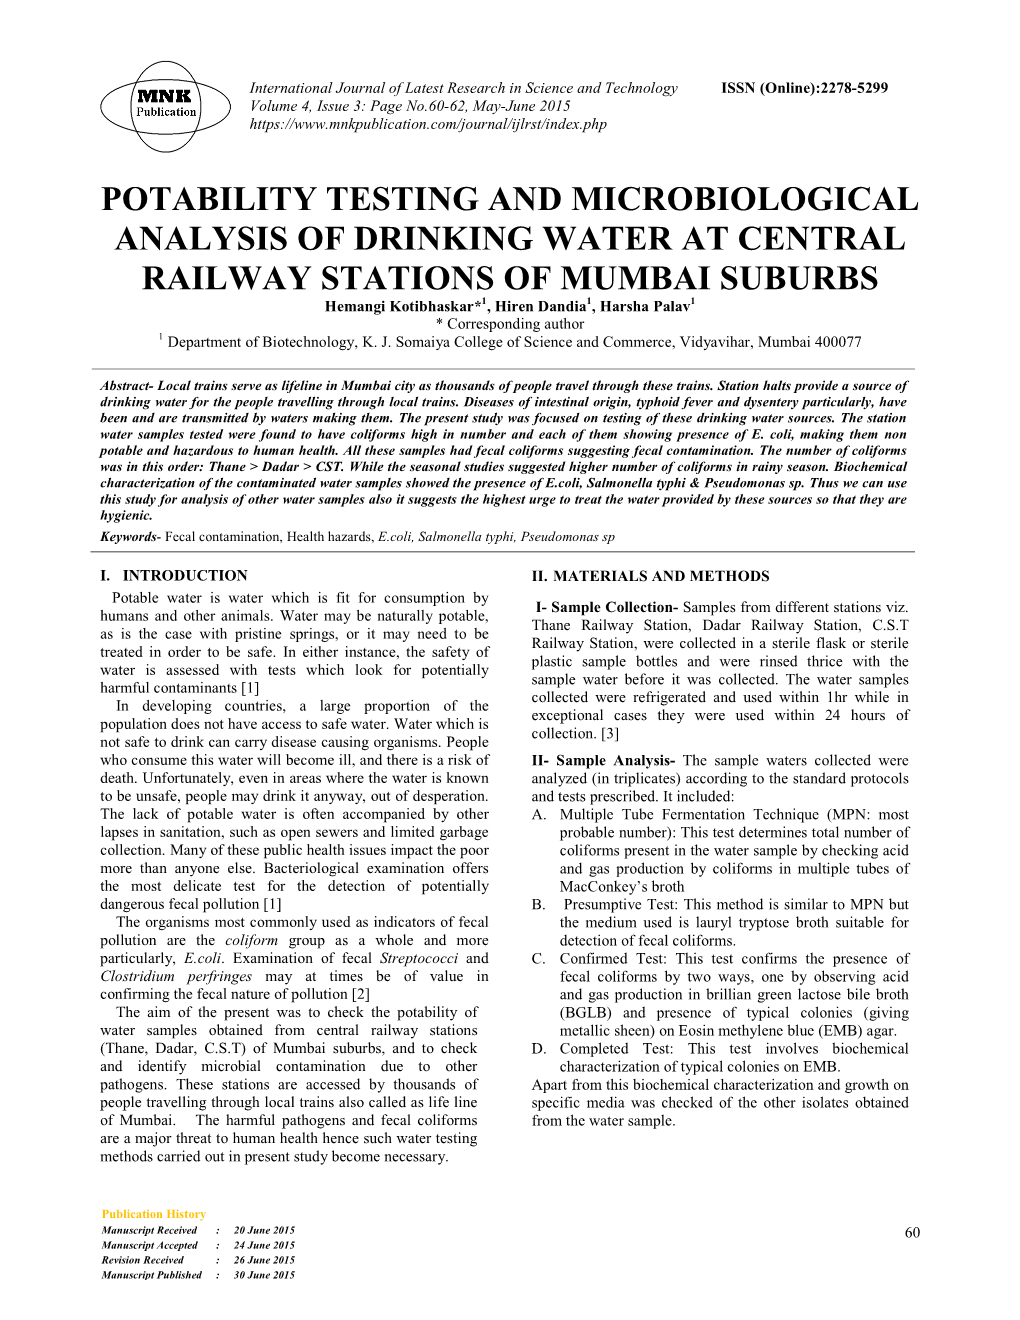 Potability Testing and Microbiological Analysis of Drinking Water at Central Railway Stations of Mumbai Suburbs